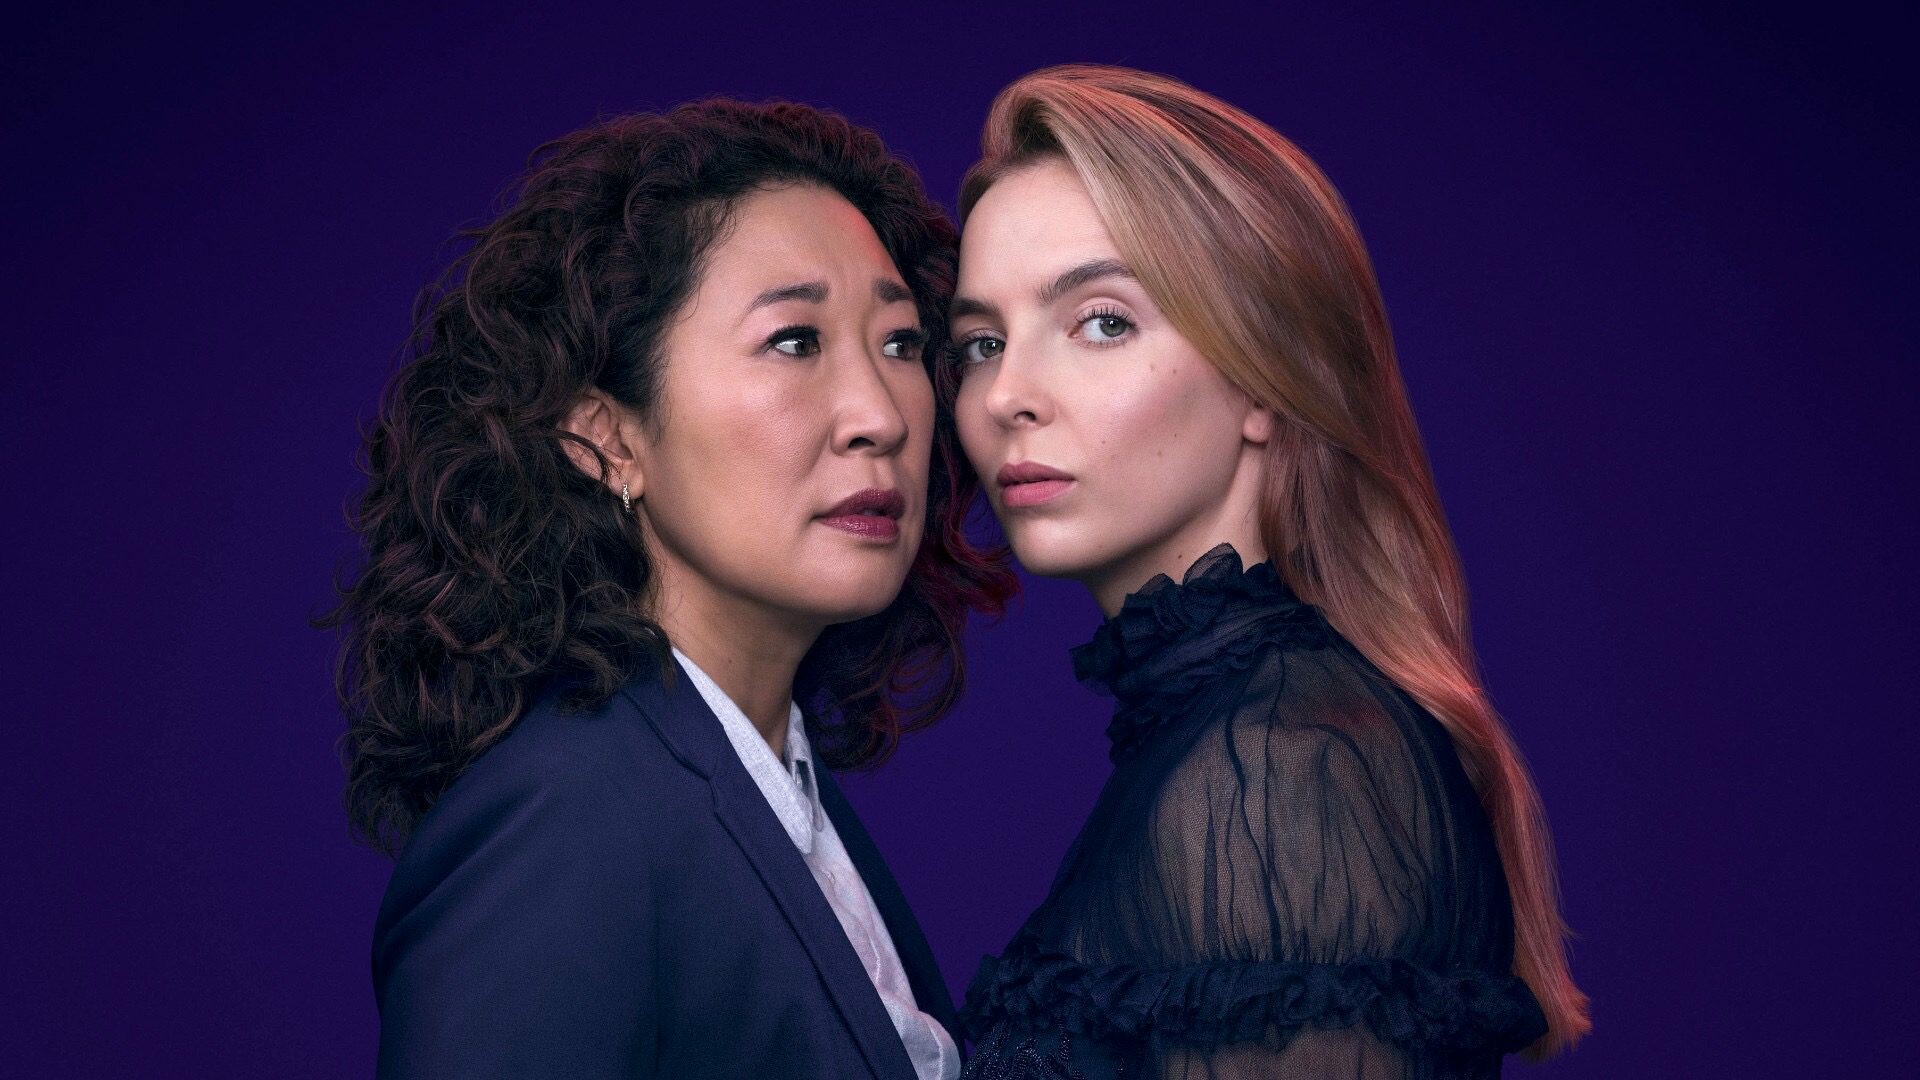 Killing Eve: Season 4, An espionage thriller primarily starring Sandra Oh and Jodie Comer. 1920x1080 Full HD Wallpaper.